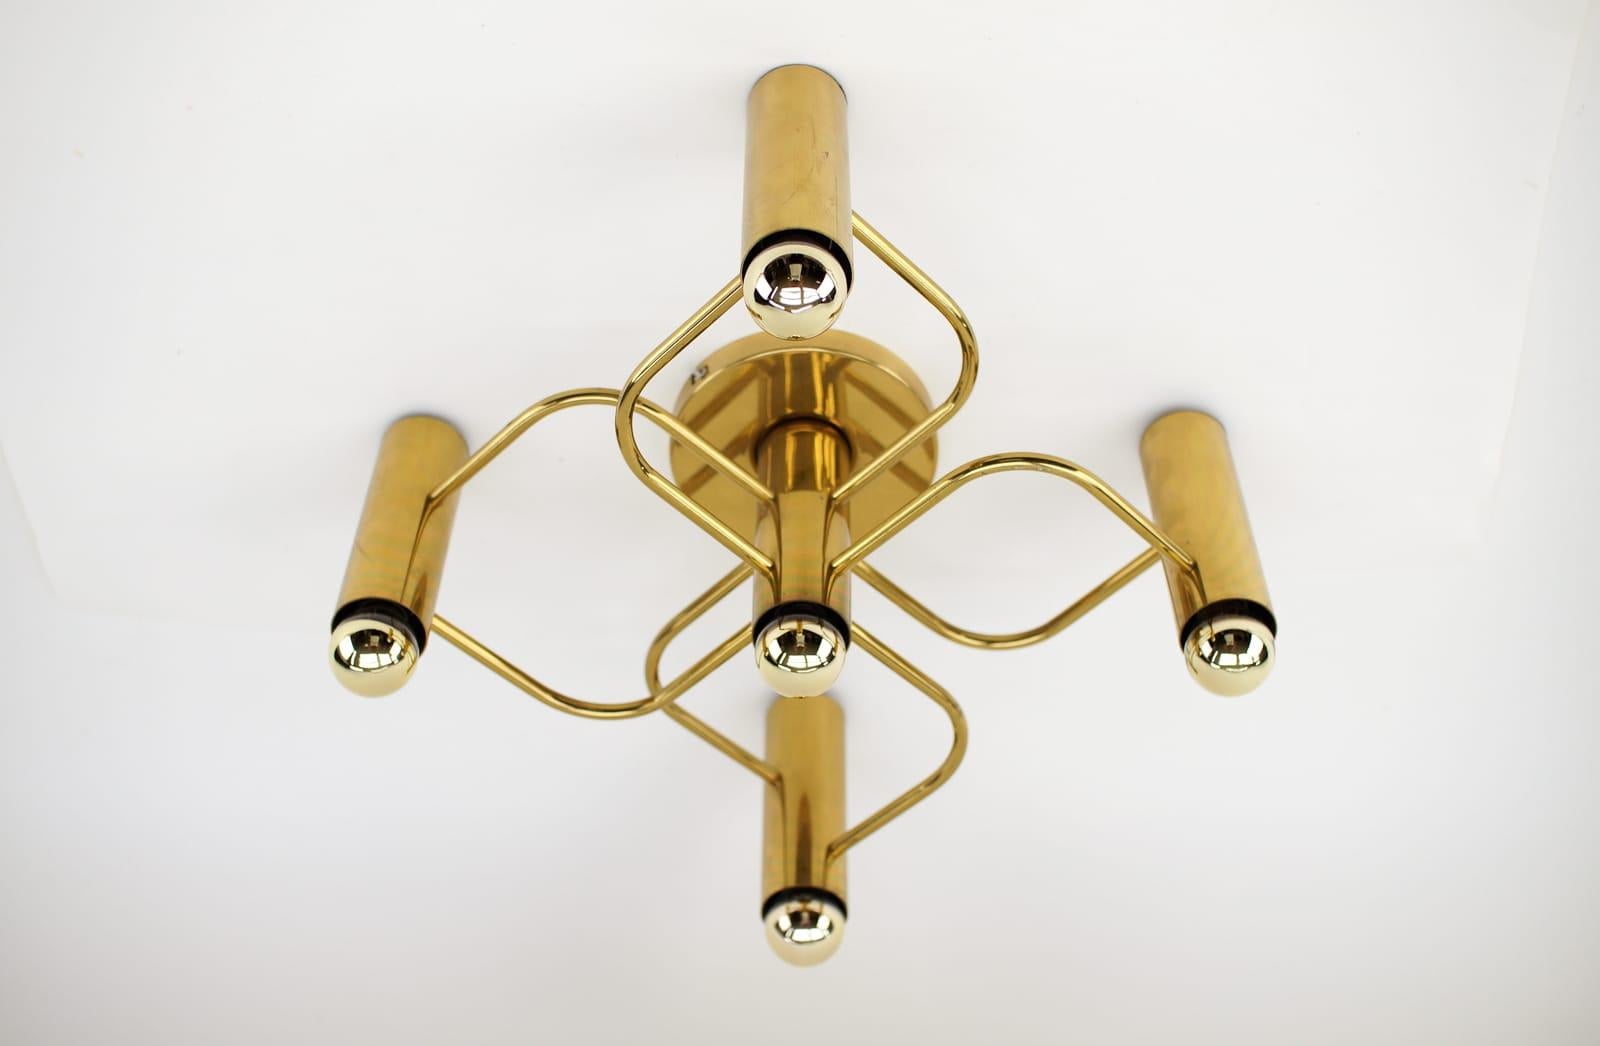 Metal Set of Sculptural Ceiling and Wall Light Flush Mount Chandelier by Leola, 1960s For Sale